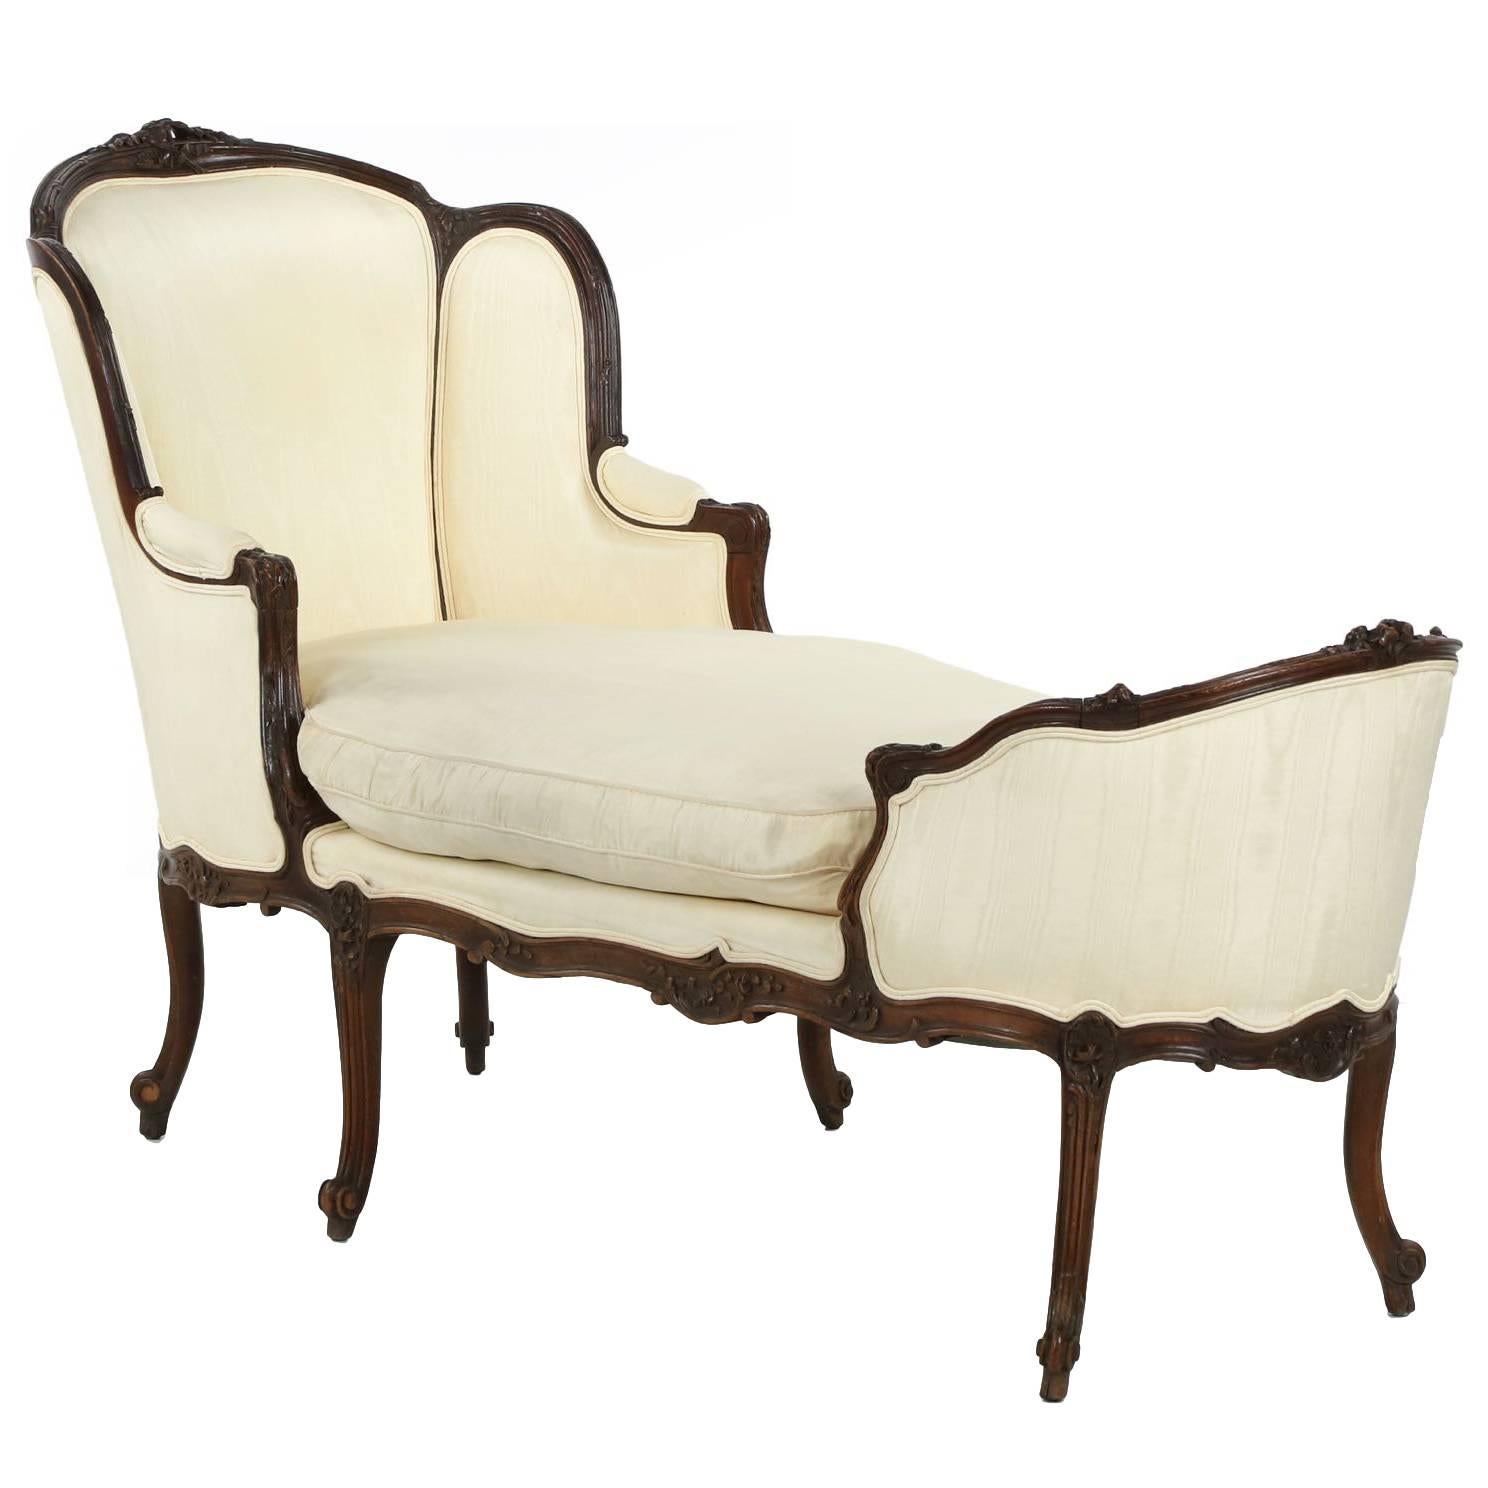 French Louis XV Style Carved Walnut Chaise Longue Lounge Settee, 19th Century